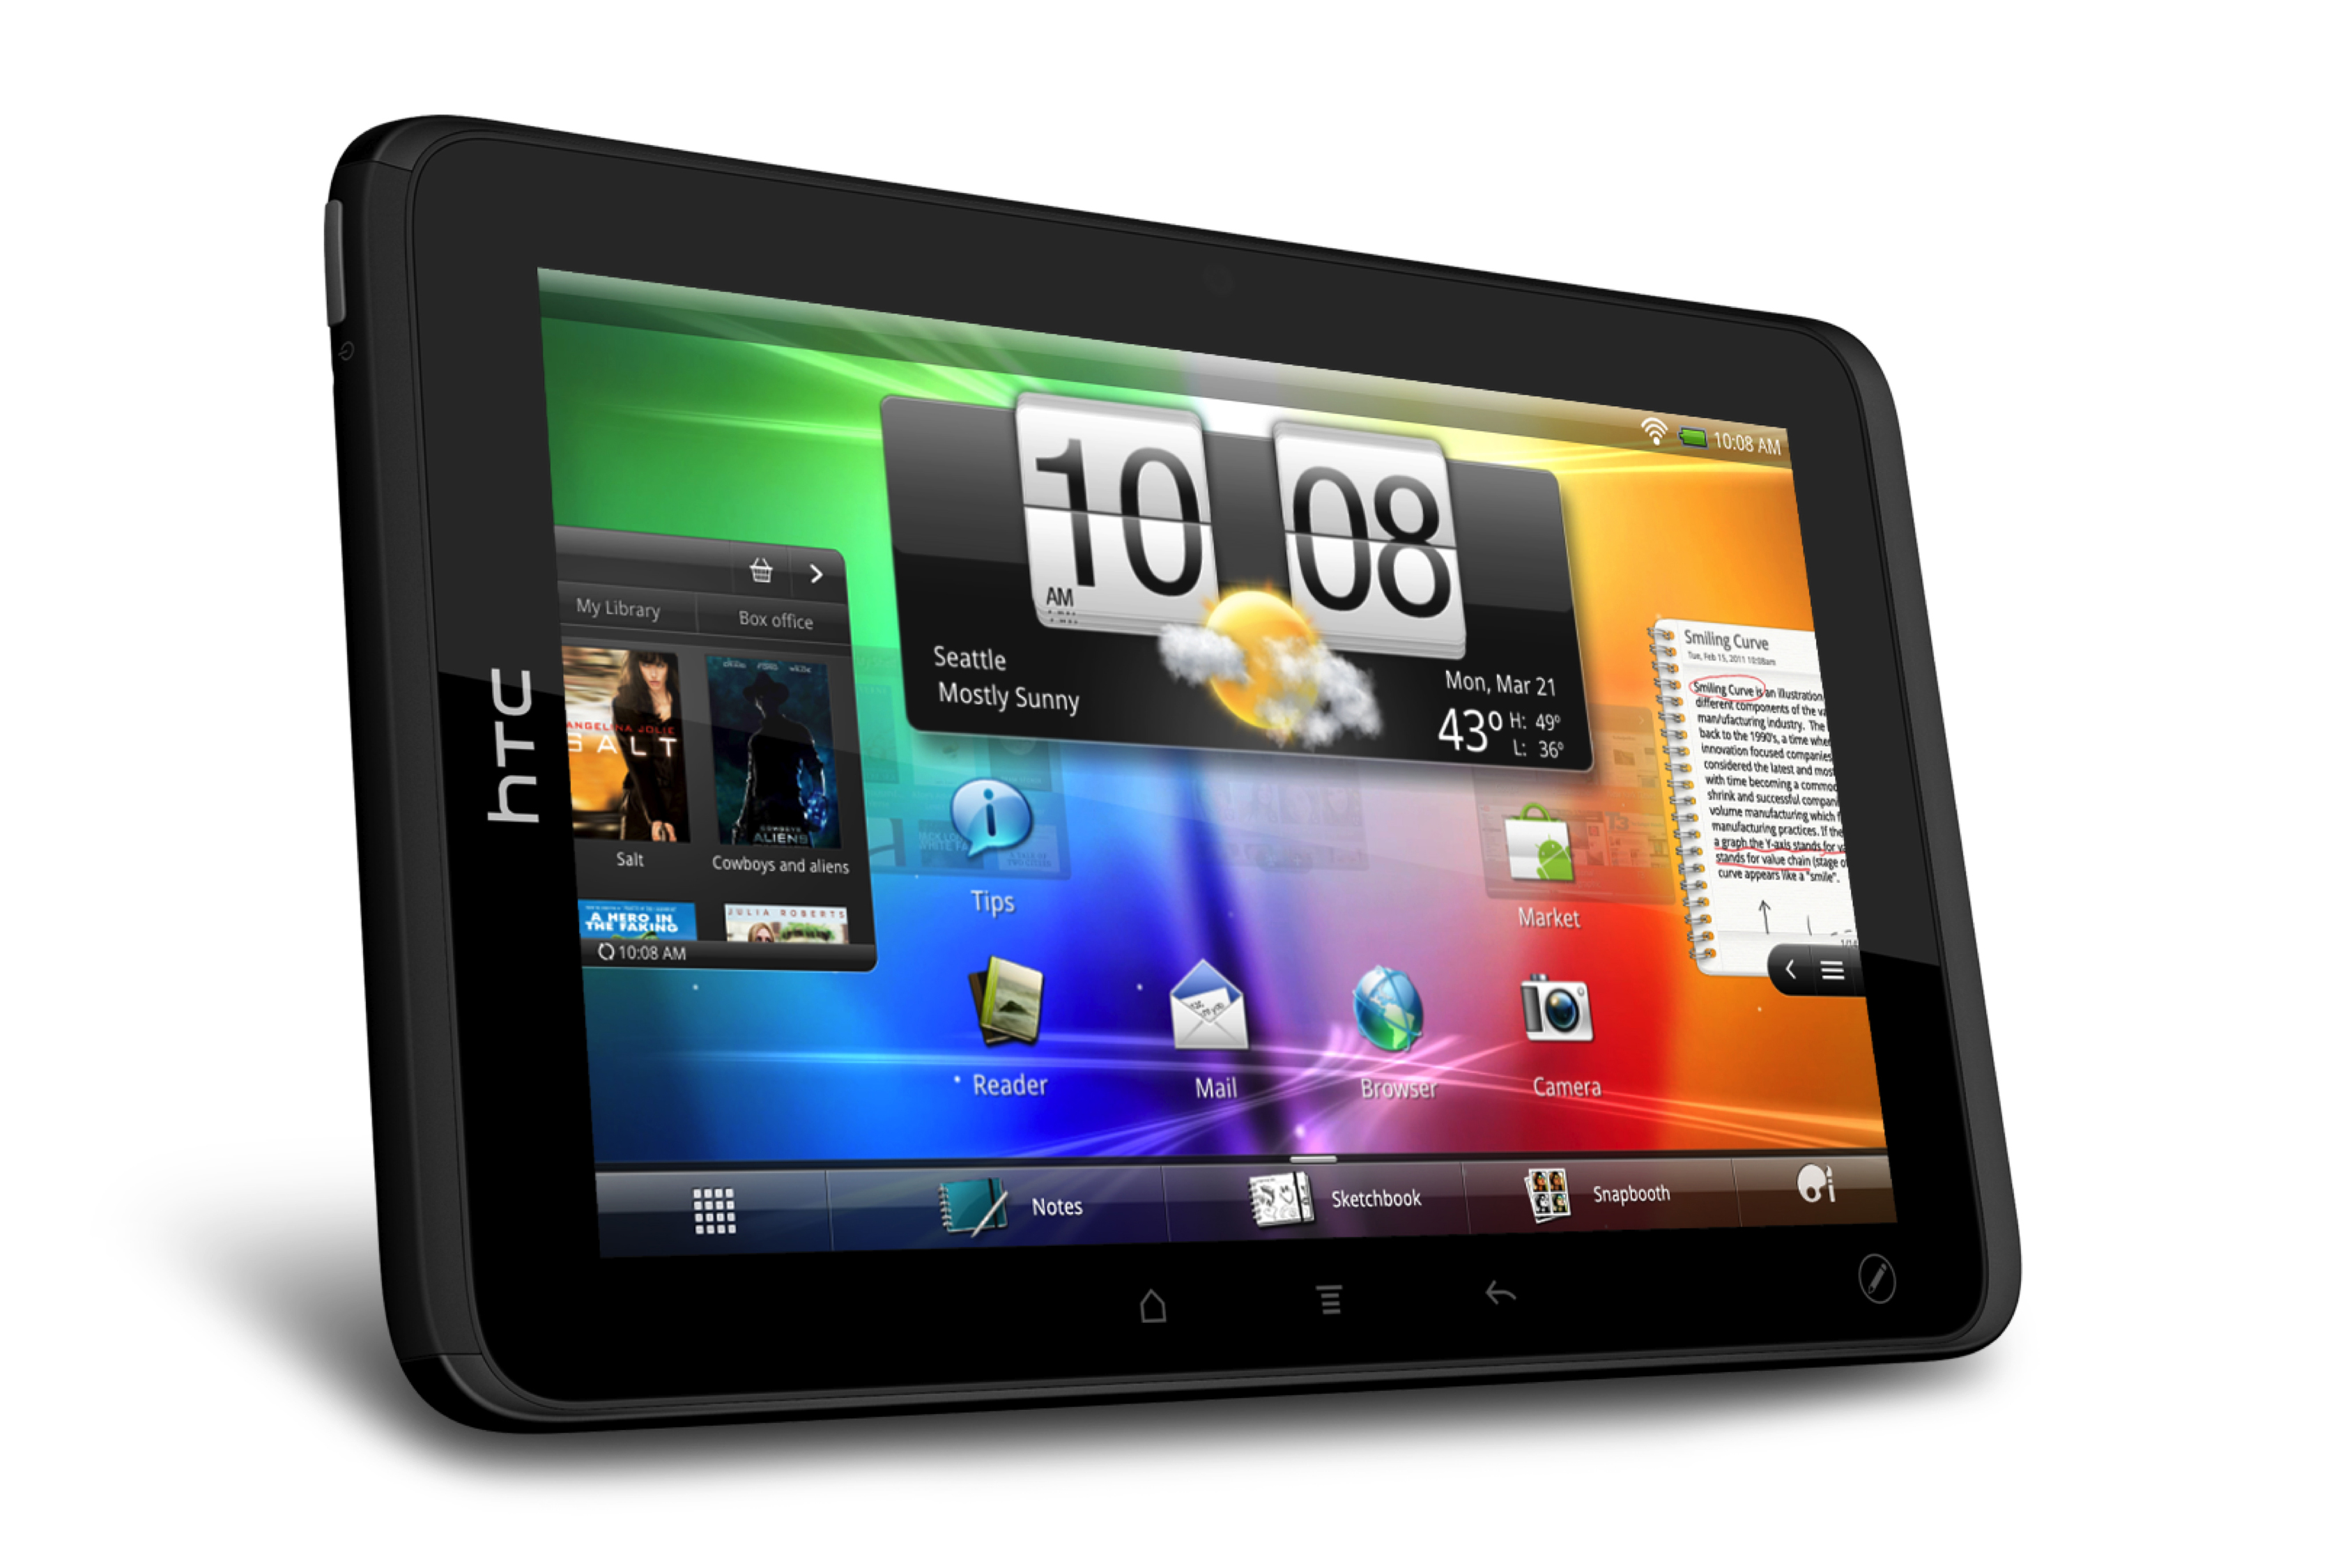 HTC will produce Windows tablets in 2013